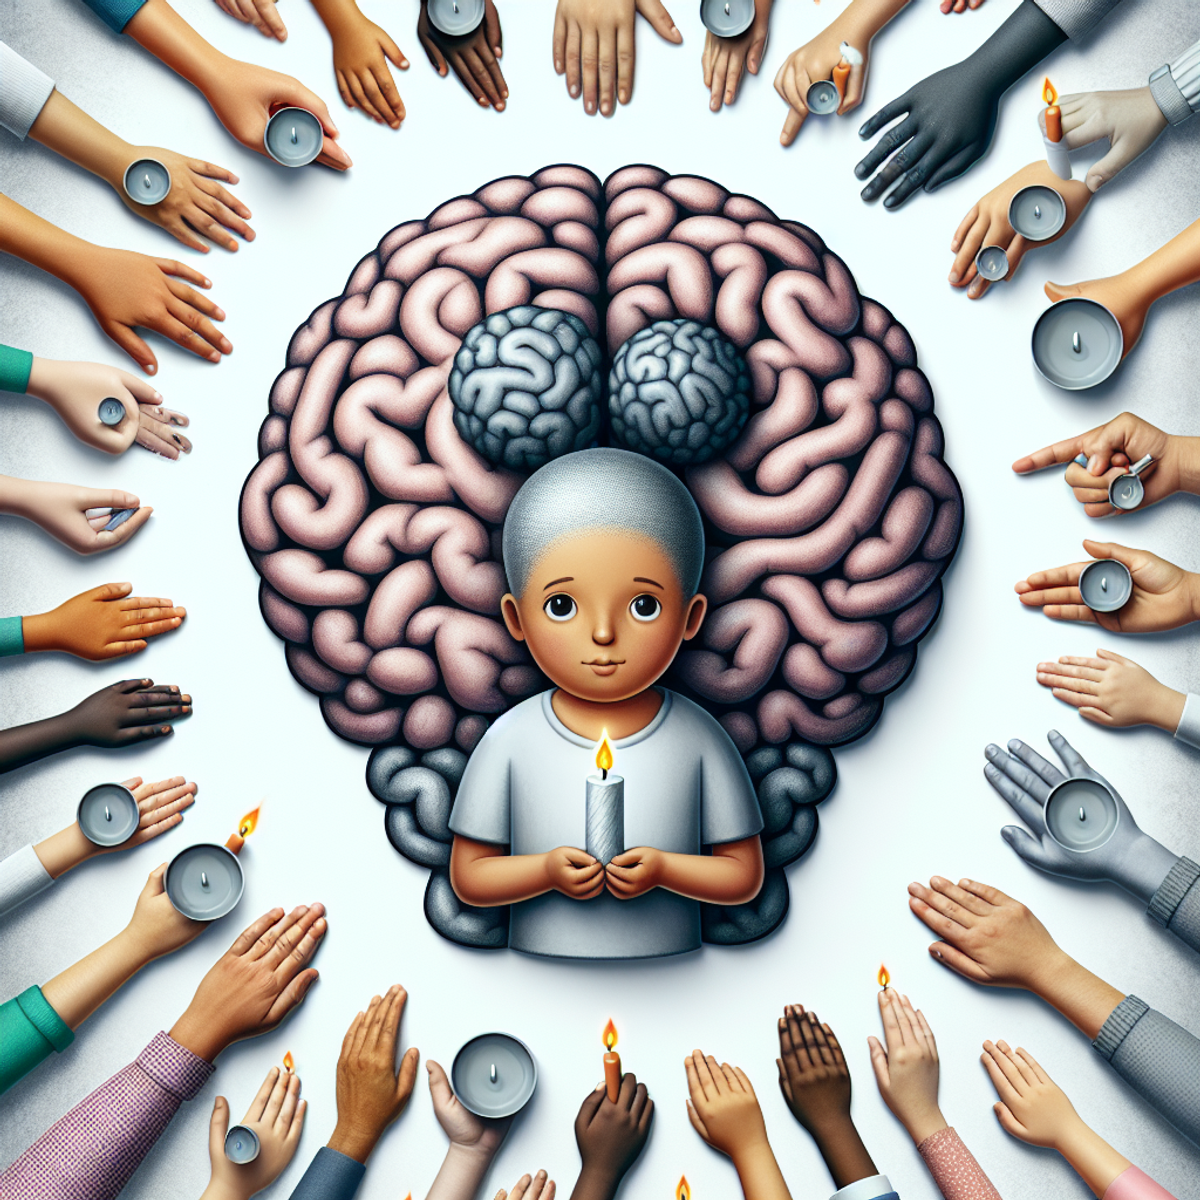 A child of diverse ethnicity holding a large, translucent brain with a shadowy lump depicting a brain tumor. Surrounding the child are candle flames, the color gray, and a multitude of hands reaching towards the centerpiece.